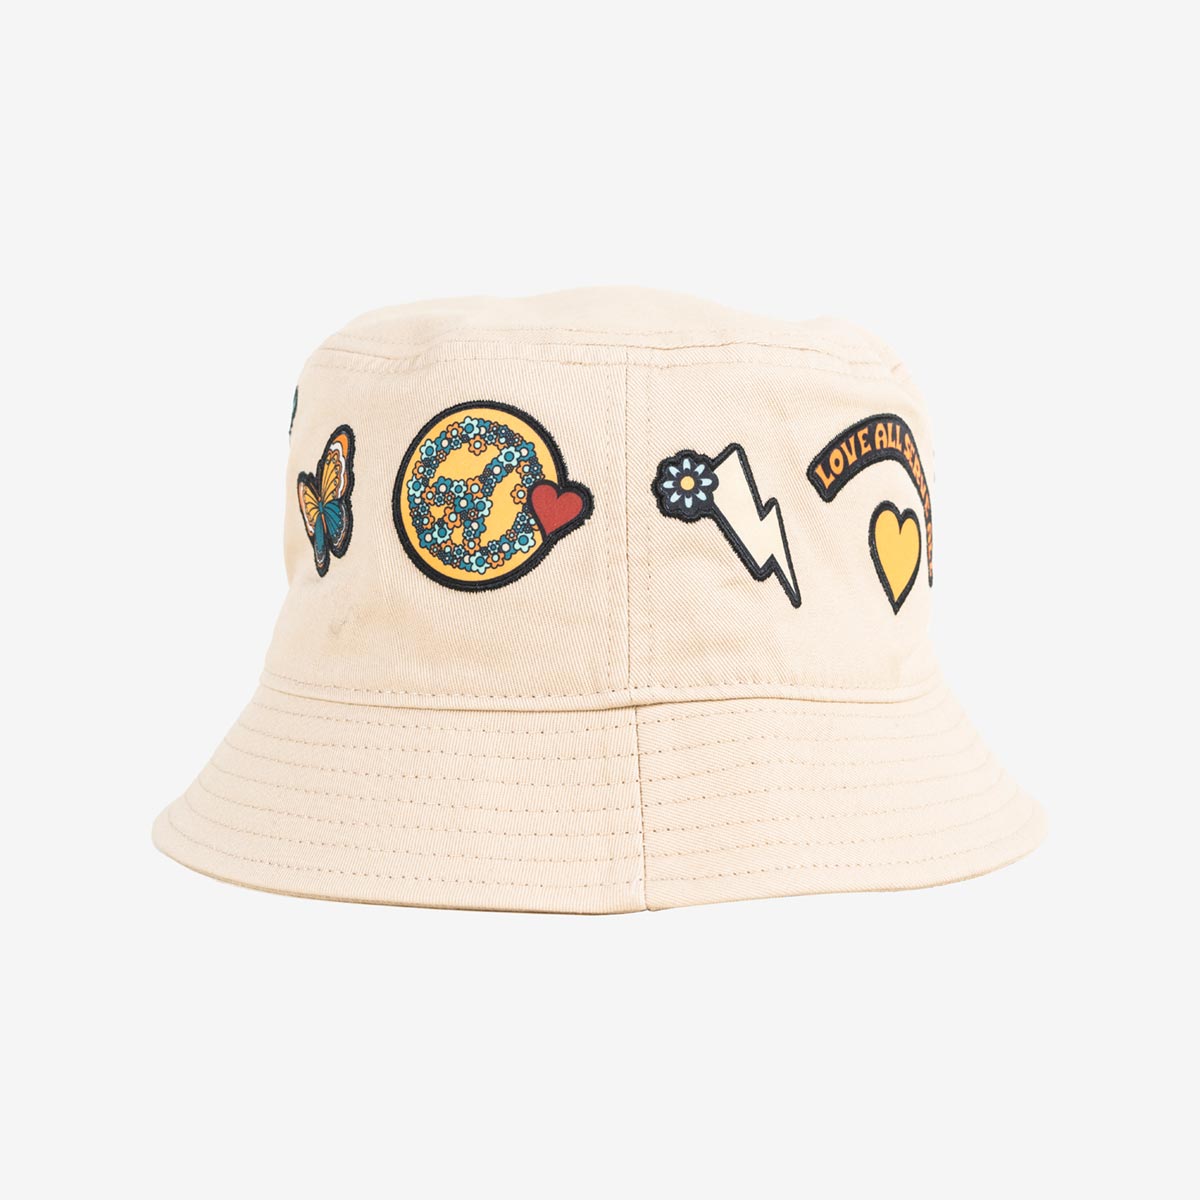 Hard Rock Music Festival Bucket Hat with Patches in Khaki - Brown